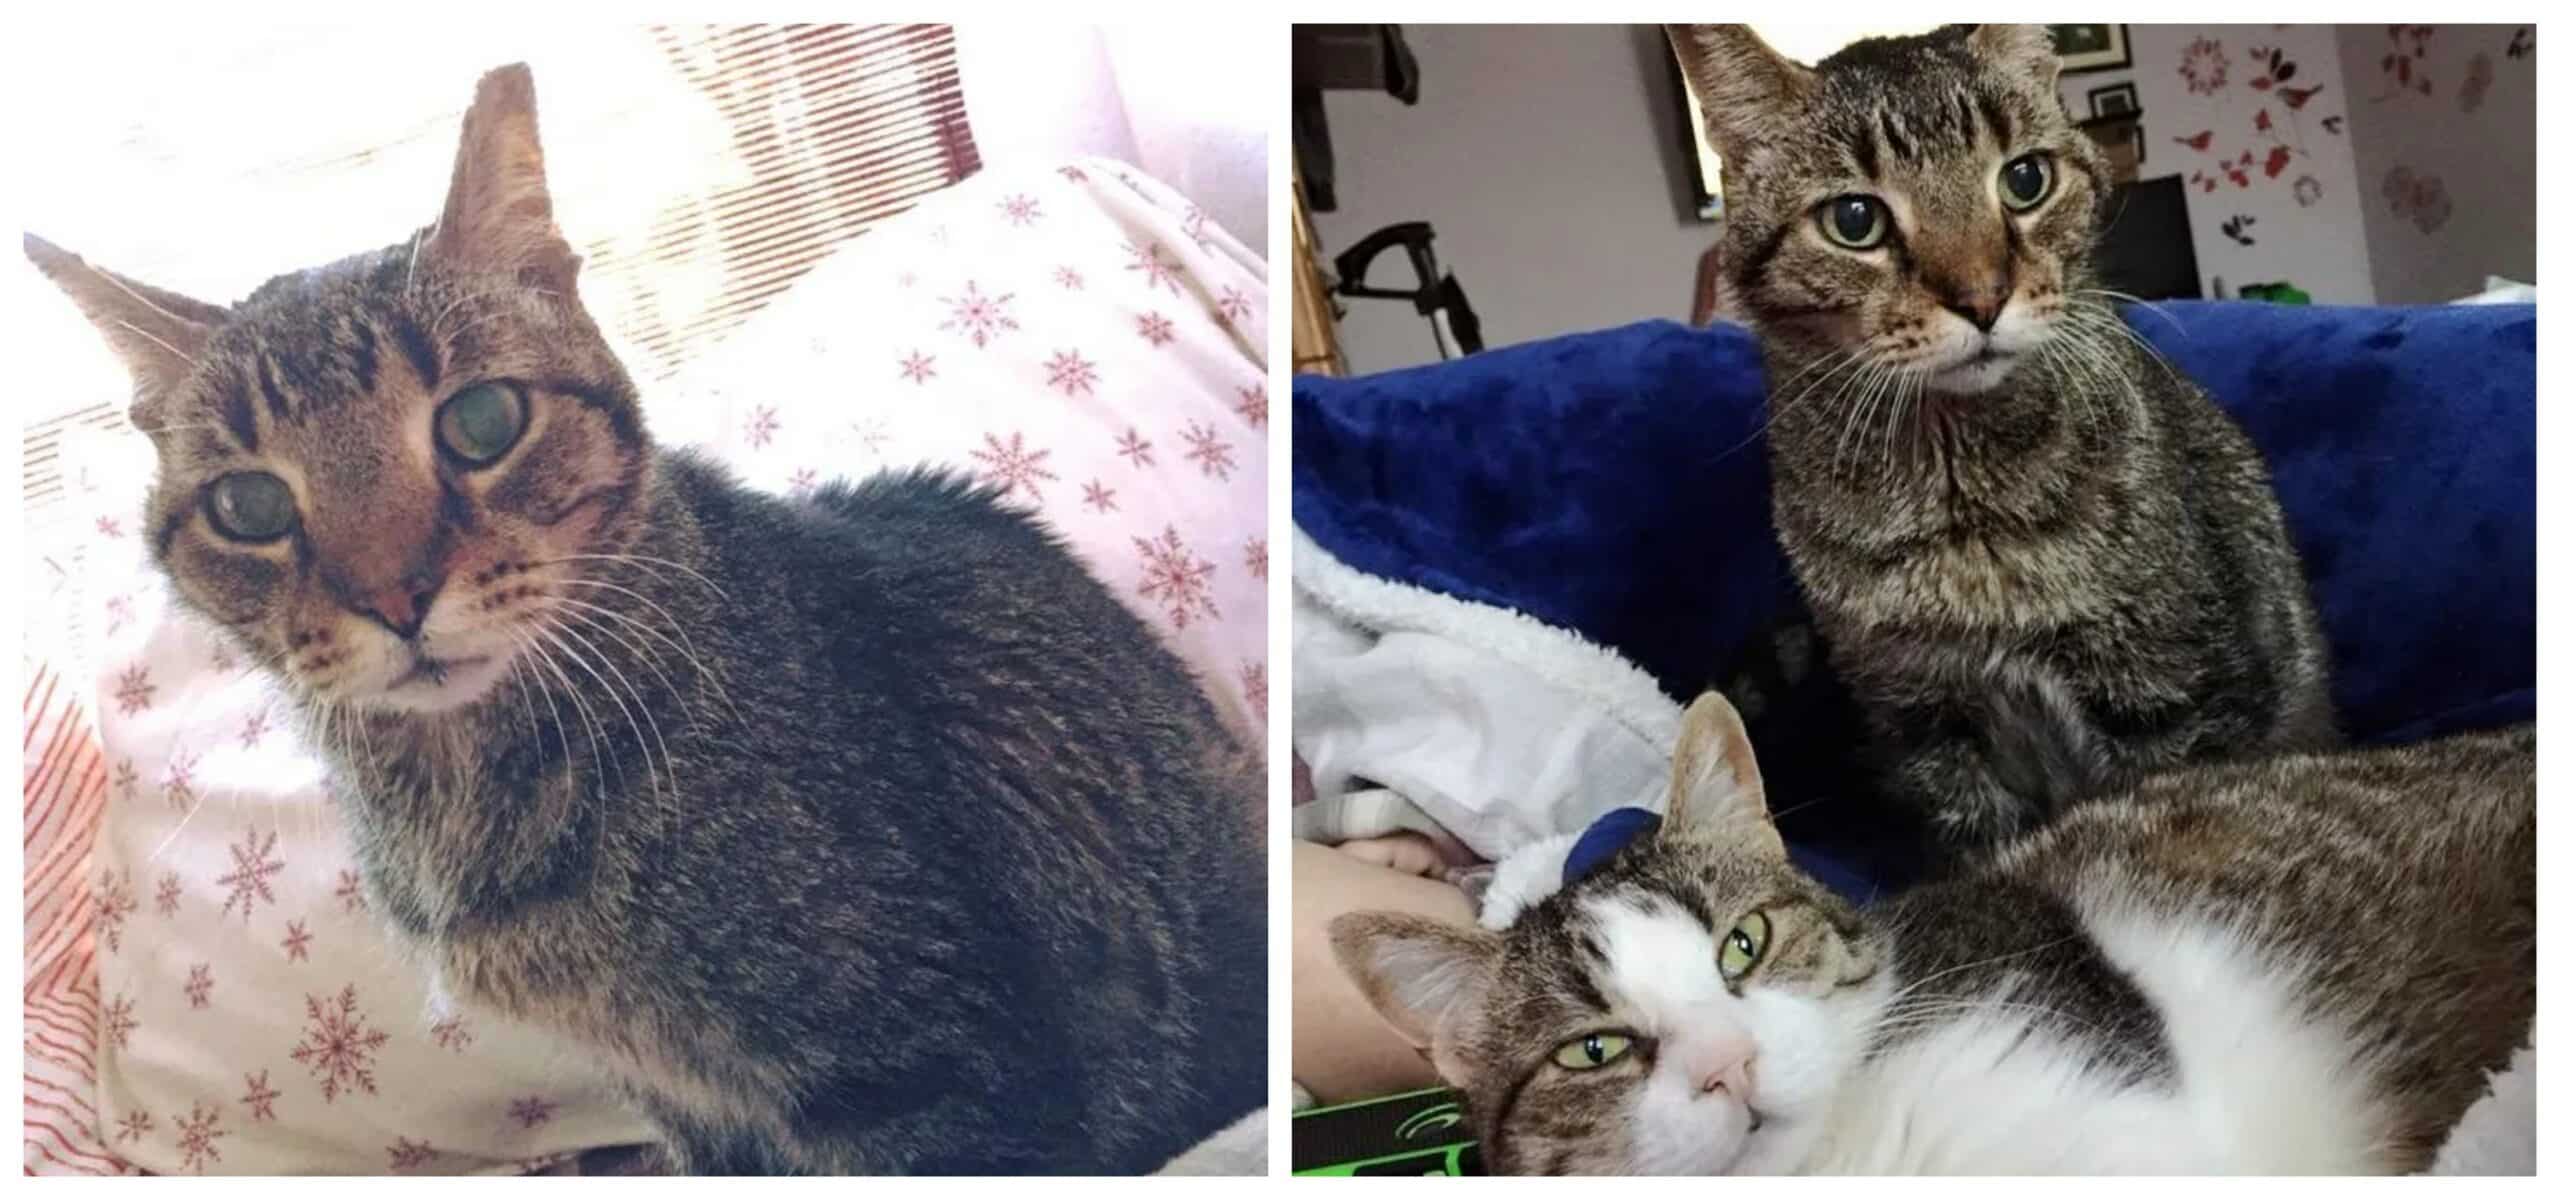 16-year-old cat lost his only home and shares his happiness at finding a new family